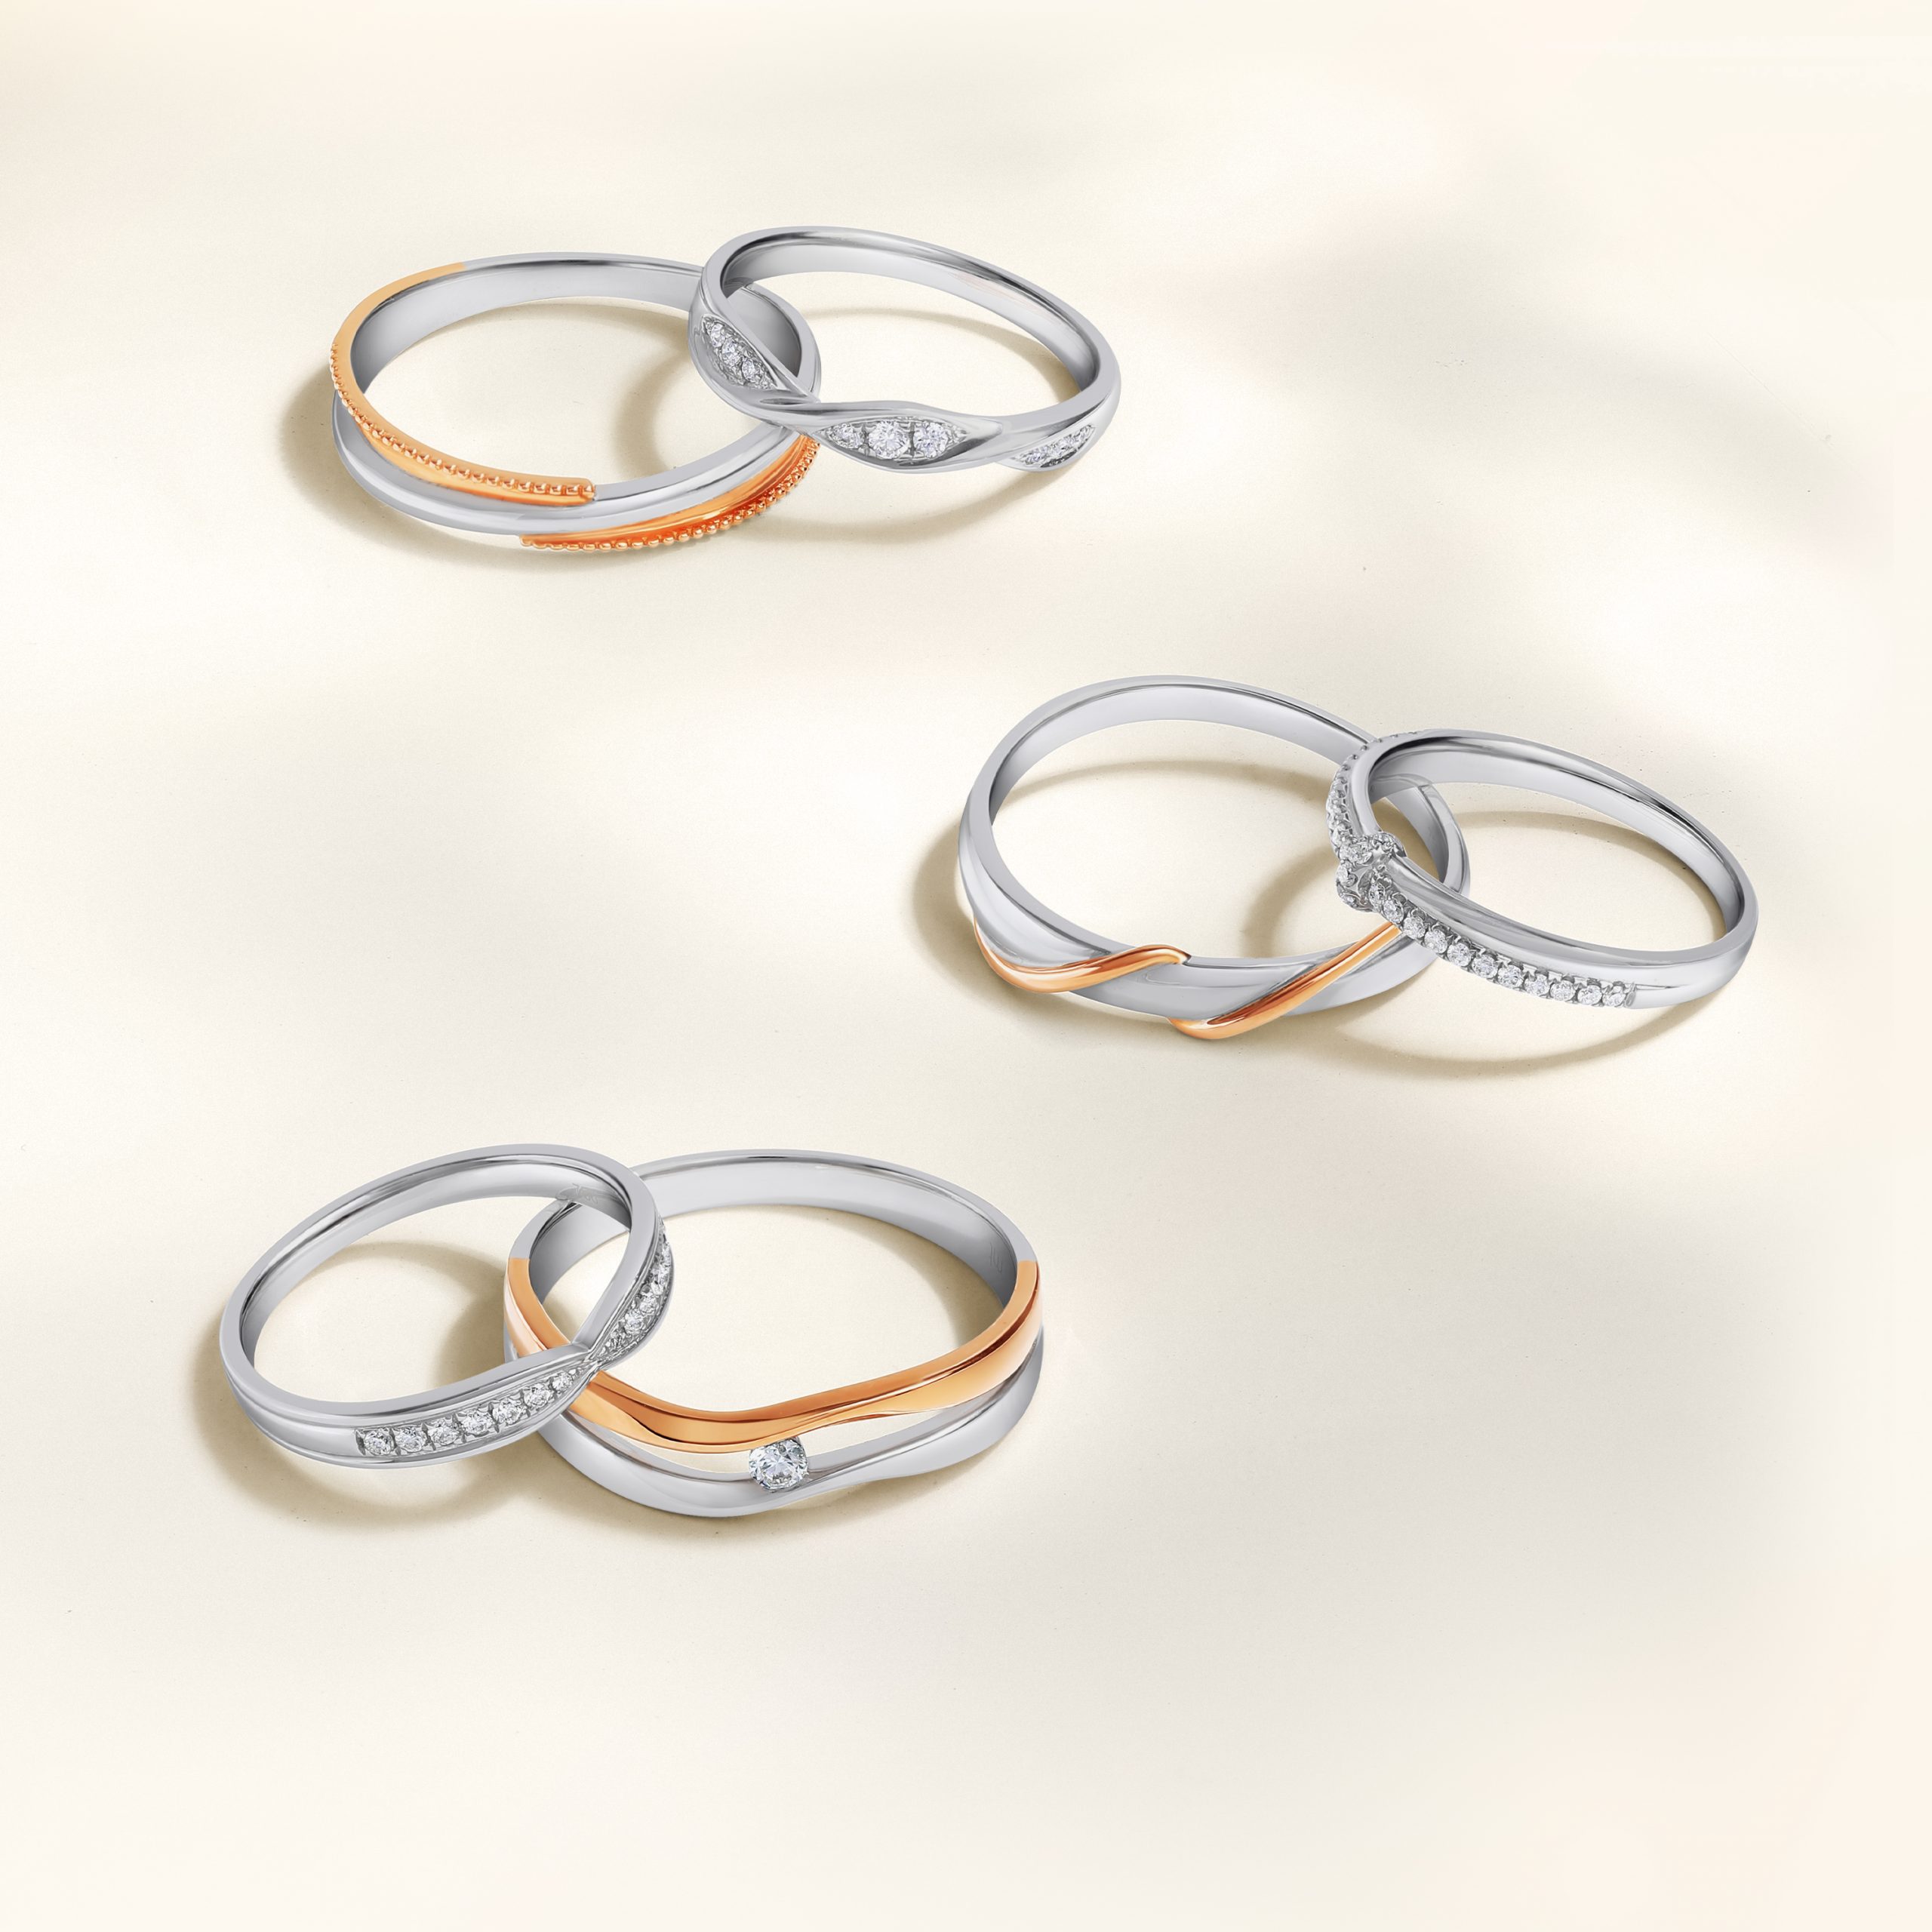 How to Choose Rose Gold Wedding Bands